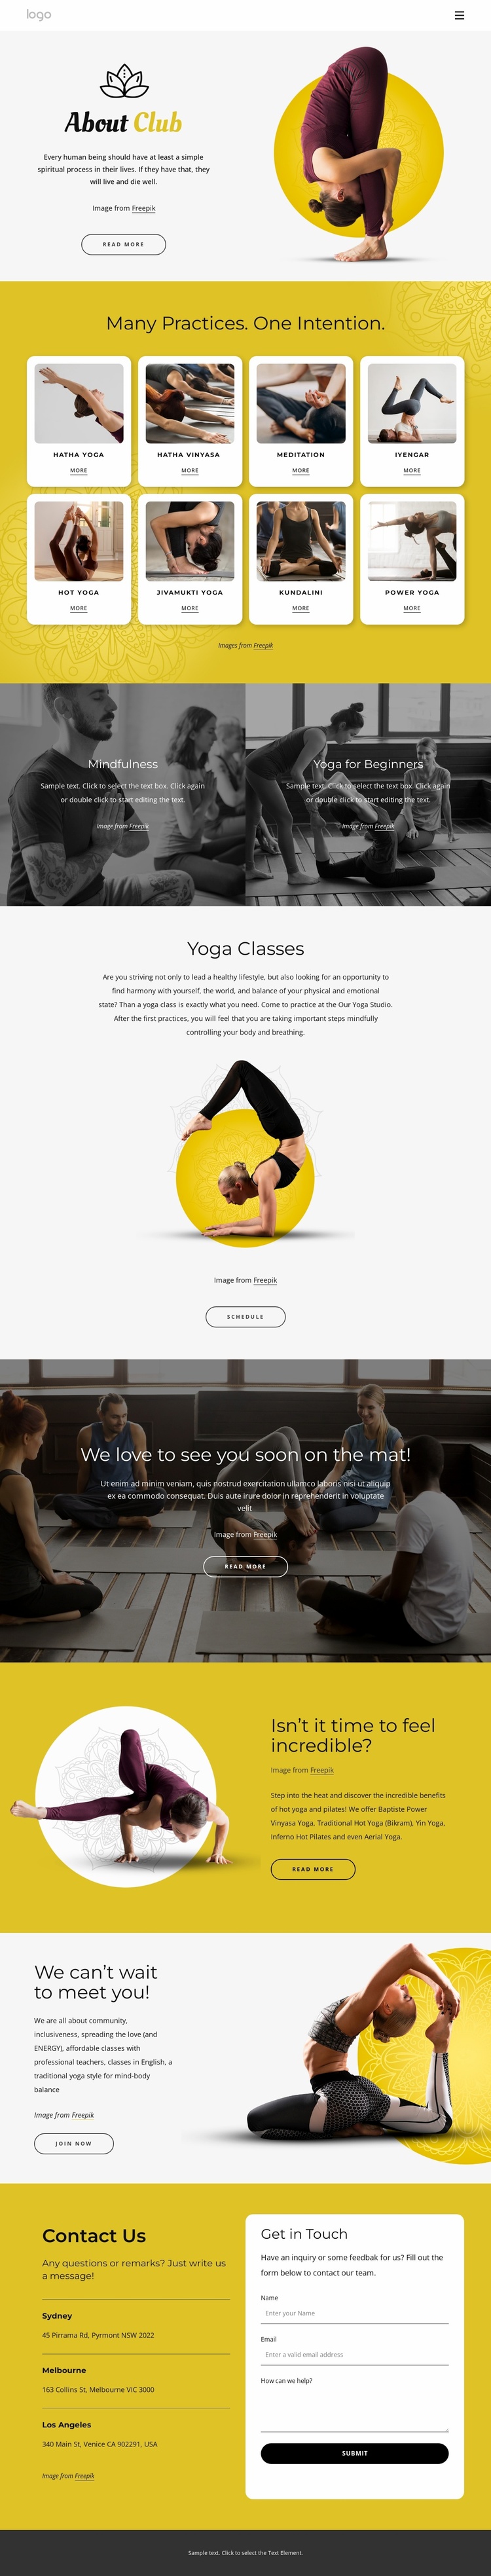 Physical, ethical and spiritual practice Website Template